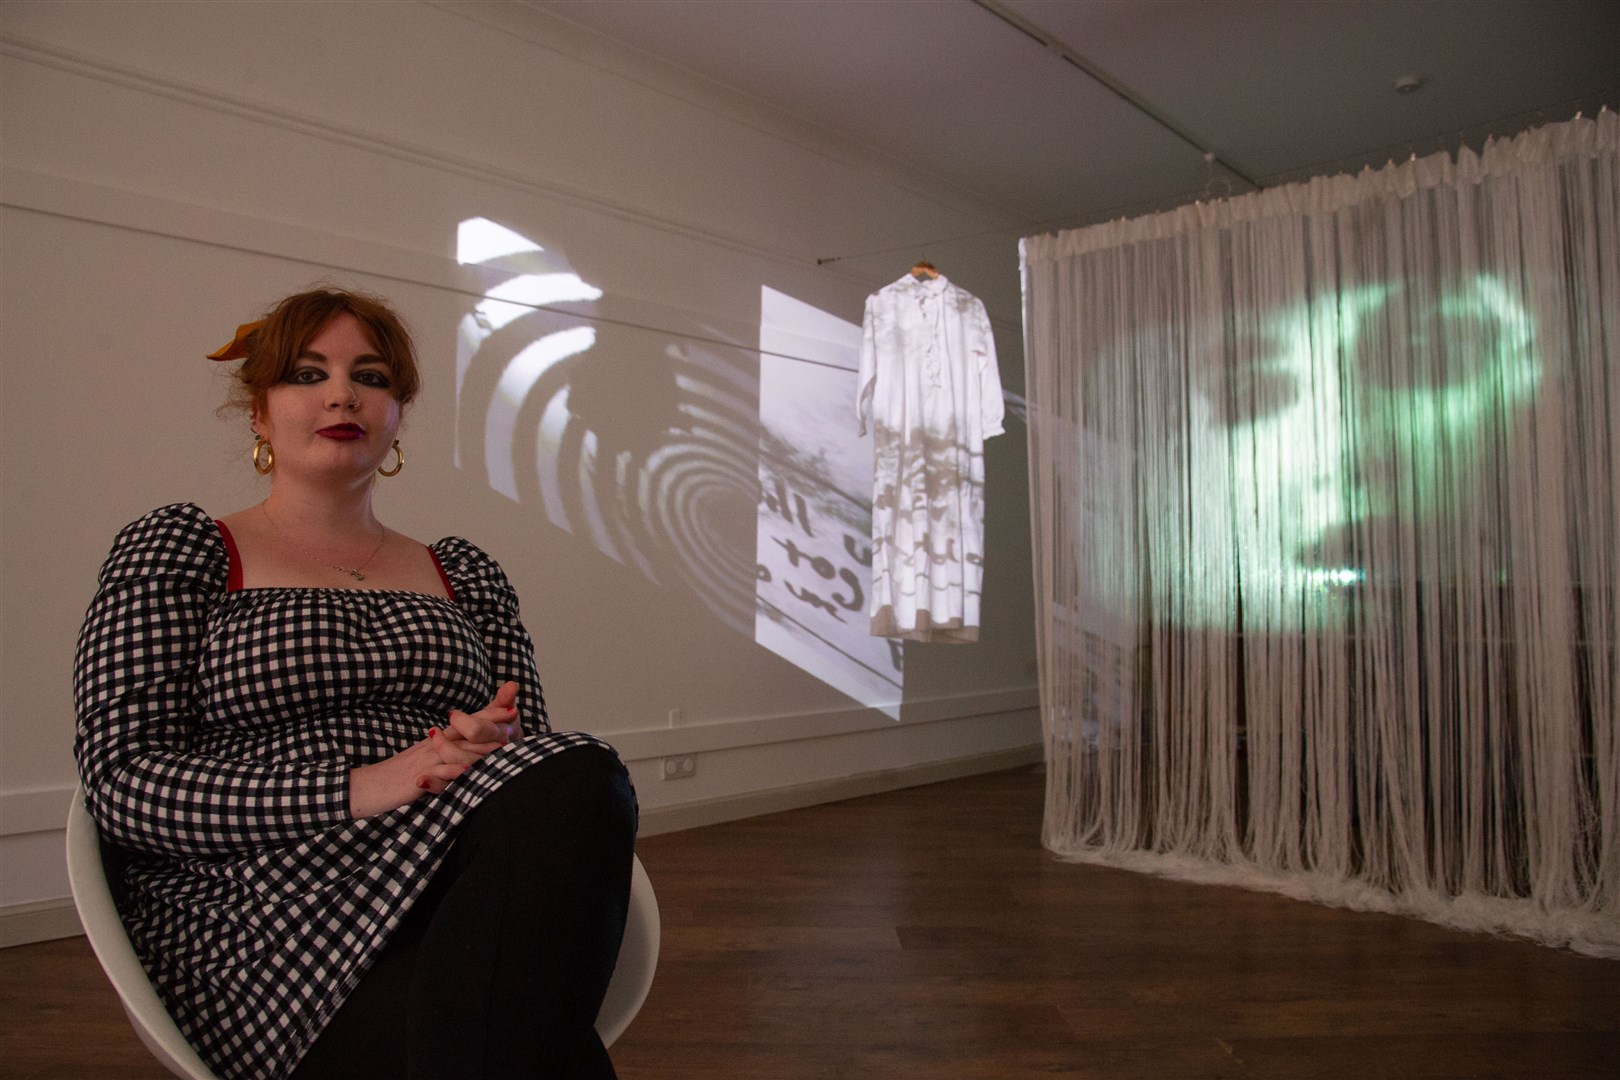 Moray School of Art graduate Corrine Marshall’s 'Lights, Camera… ReAction' exhibition is running at Gallery Pop, a new contemporary art gallery in Forres. Picture: Daniel Forsyth.